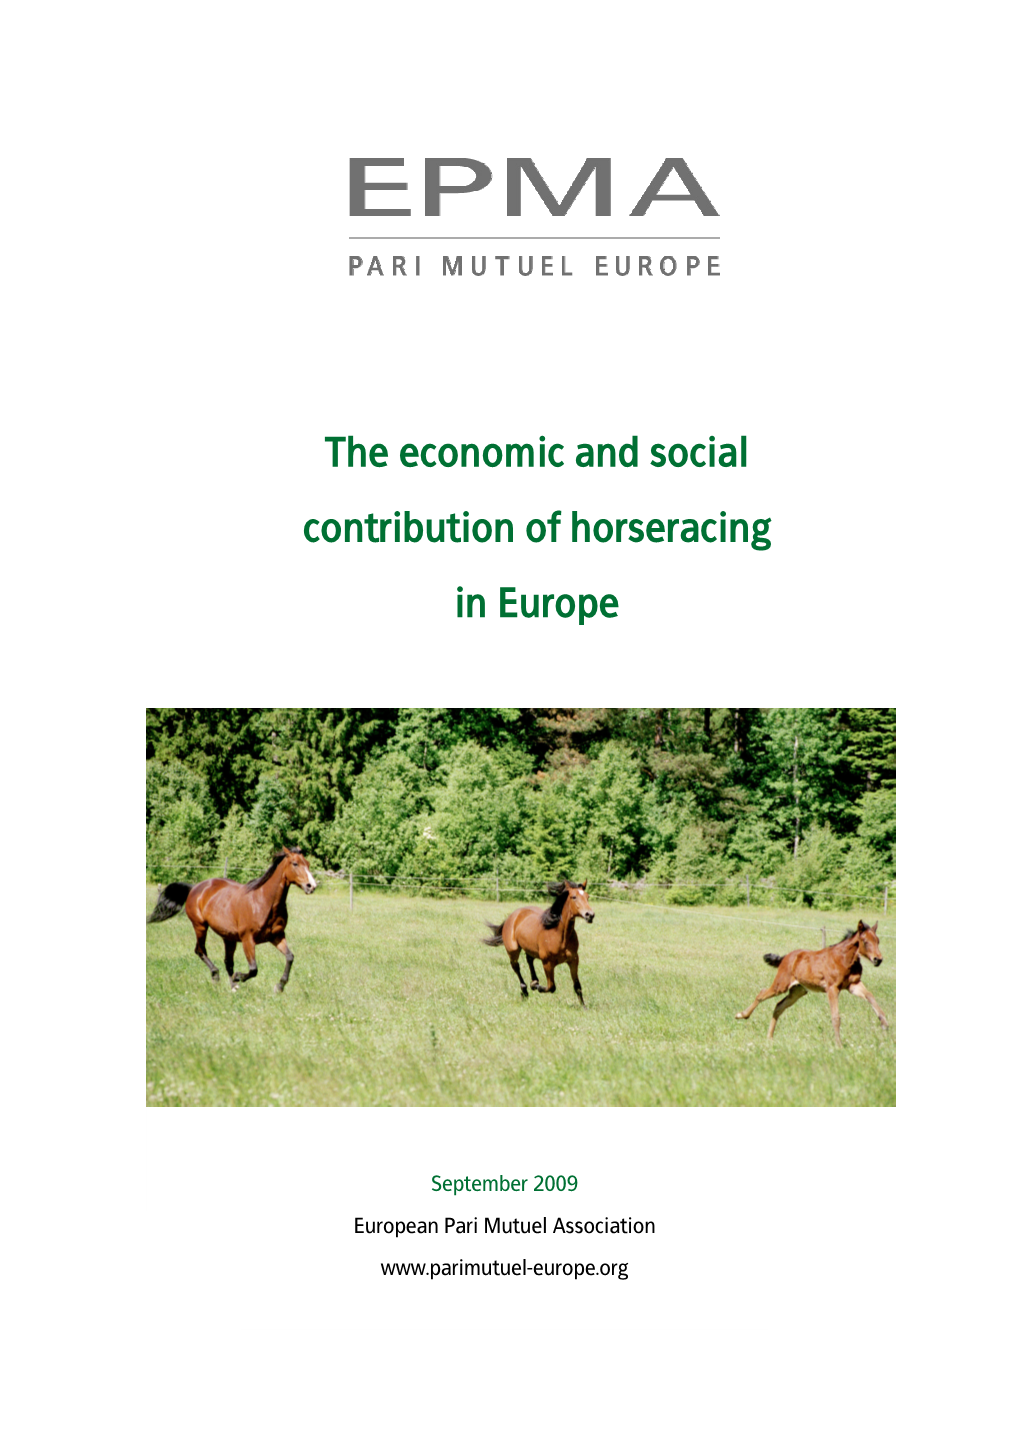 The Economic and Social Contribution of Horseracing in Europe 2